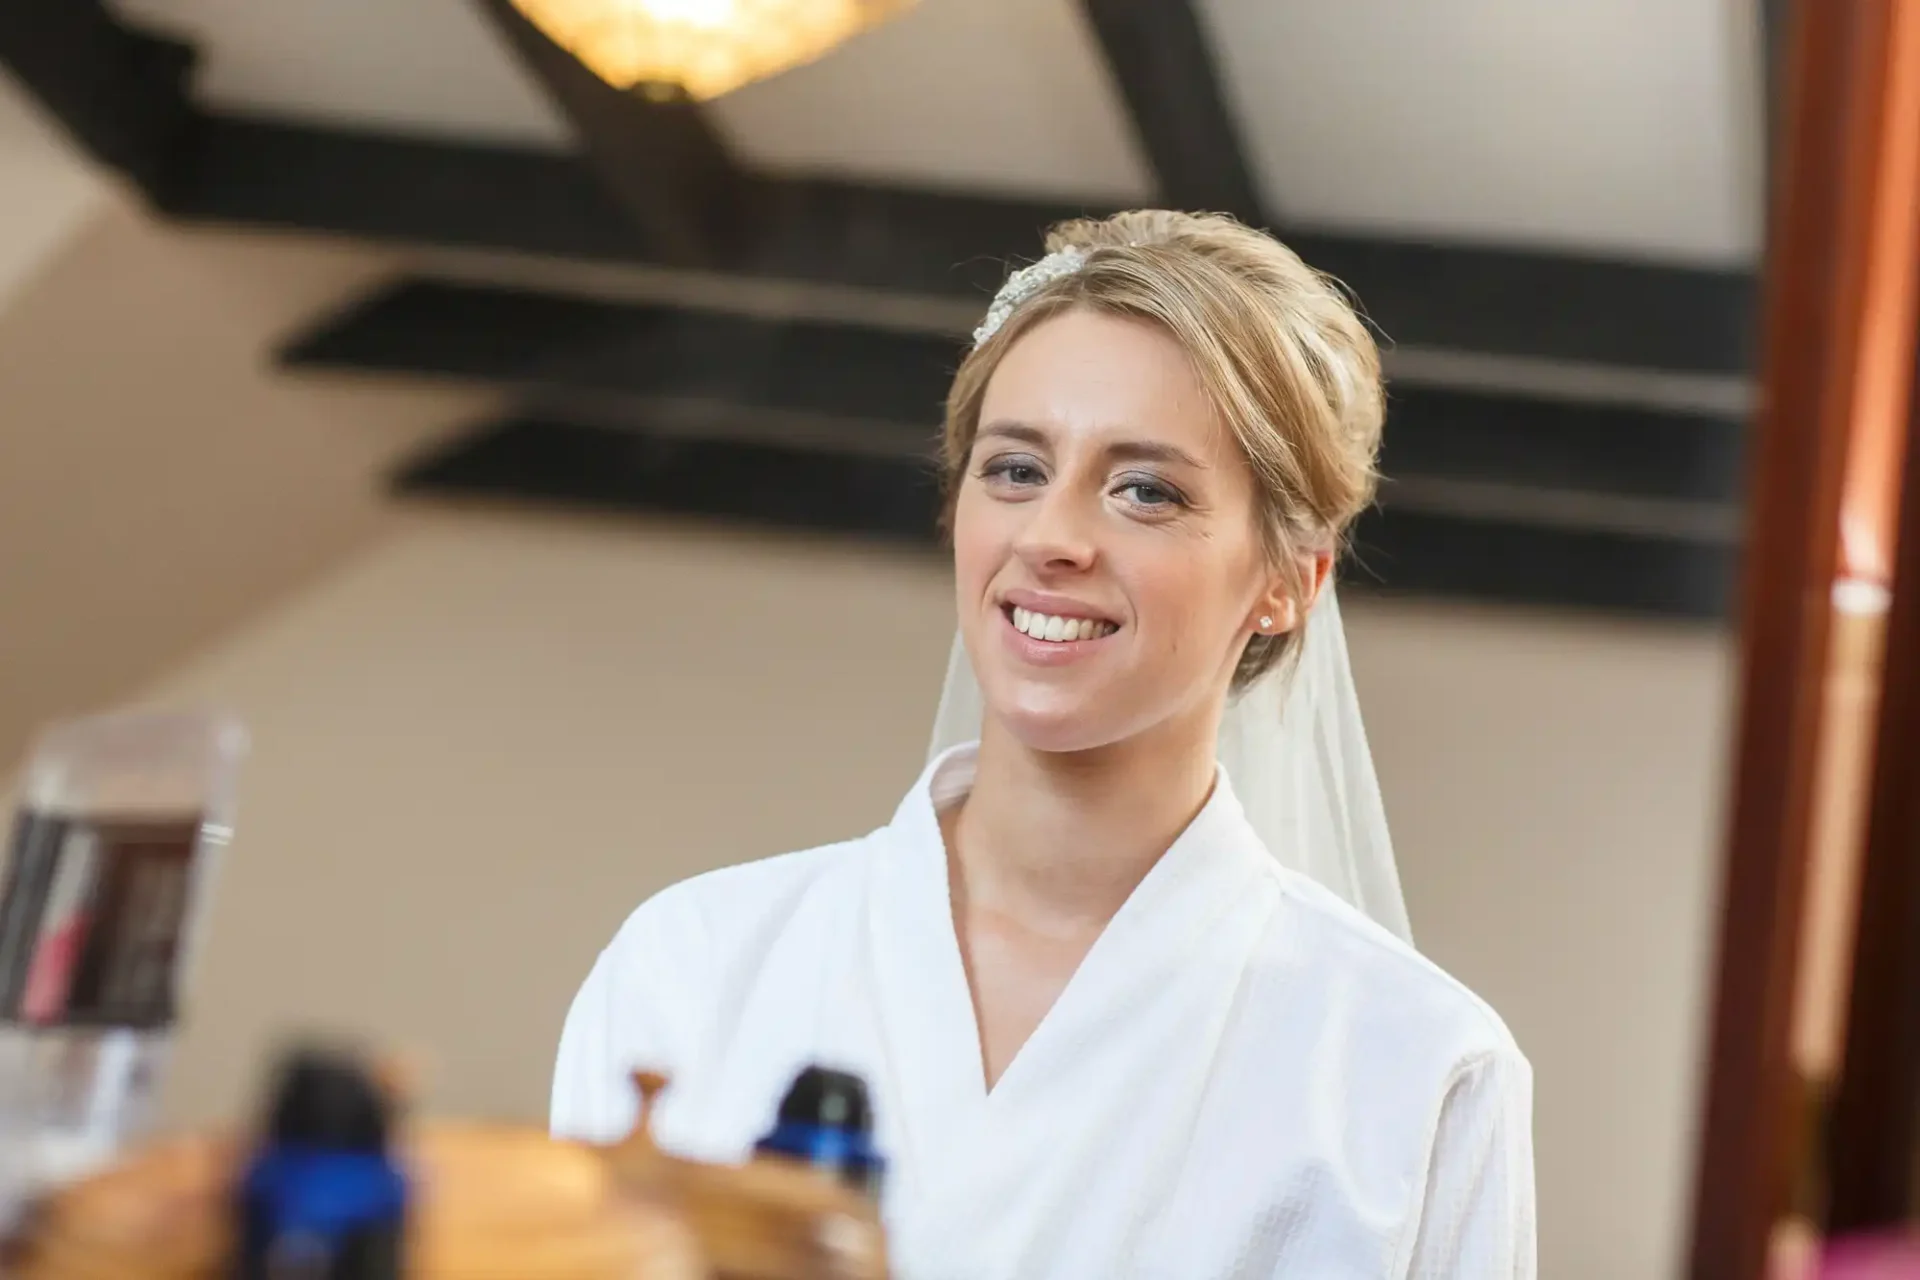 A smiling bride with short hair in a white robe and veil indoors, looking away from the camera.